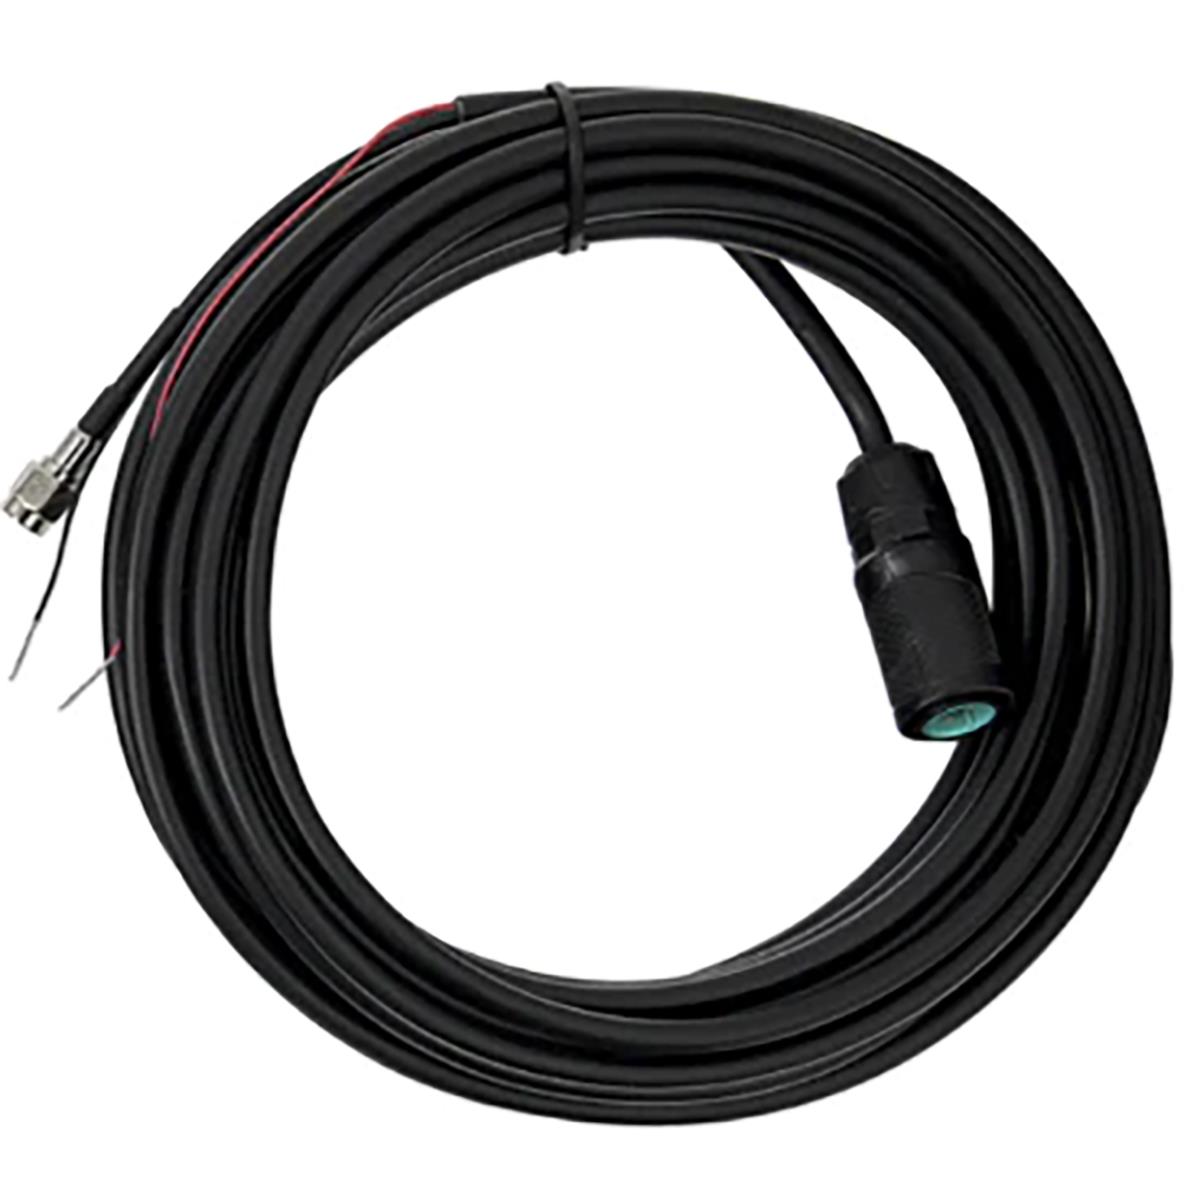 Image of SiOnyx Analog Video Power Cable for Nightwave Camera 32.8'